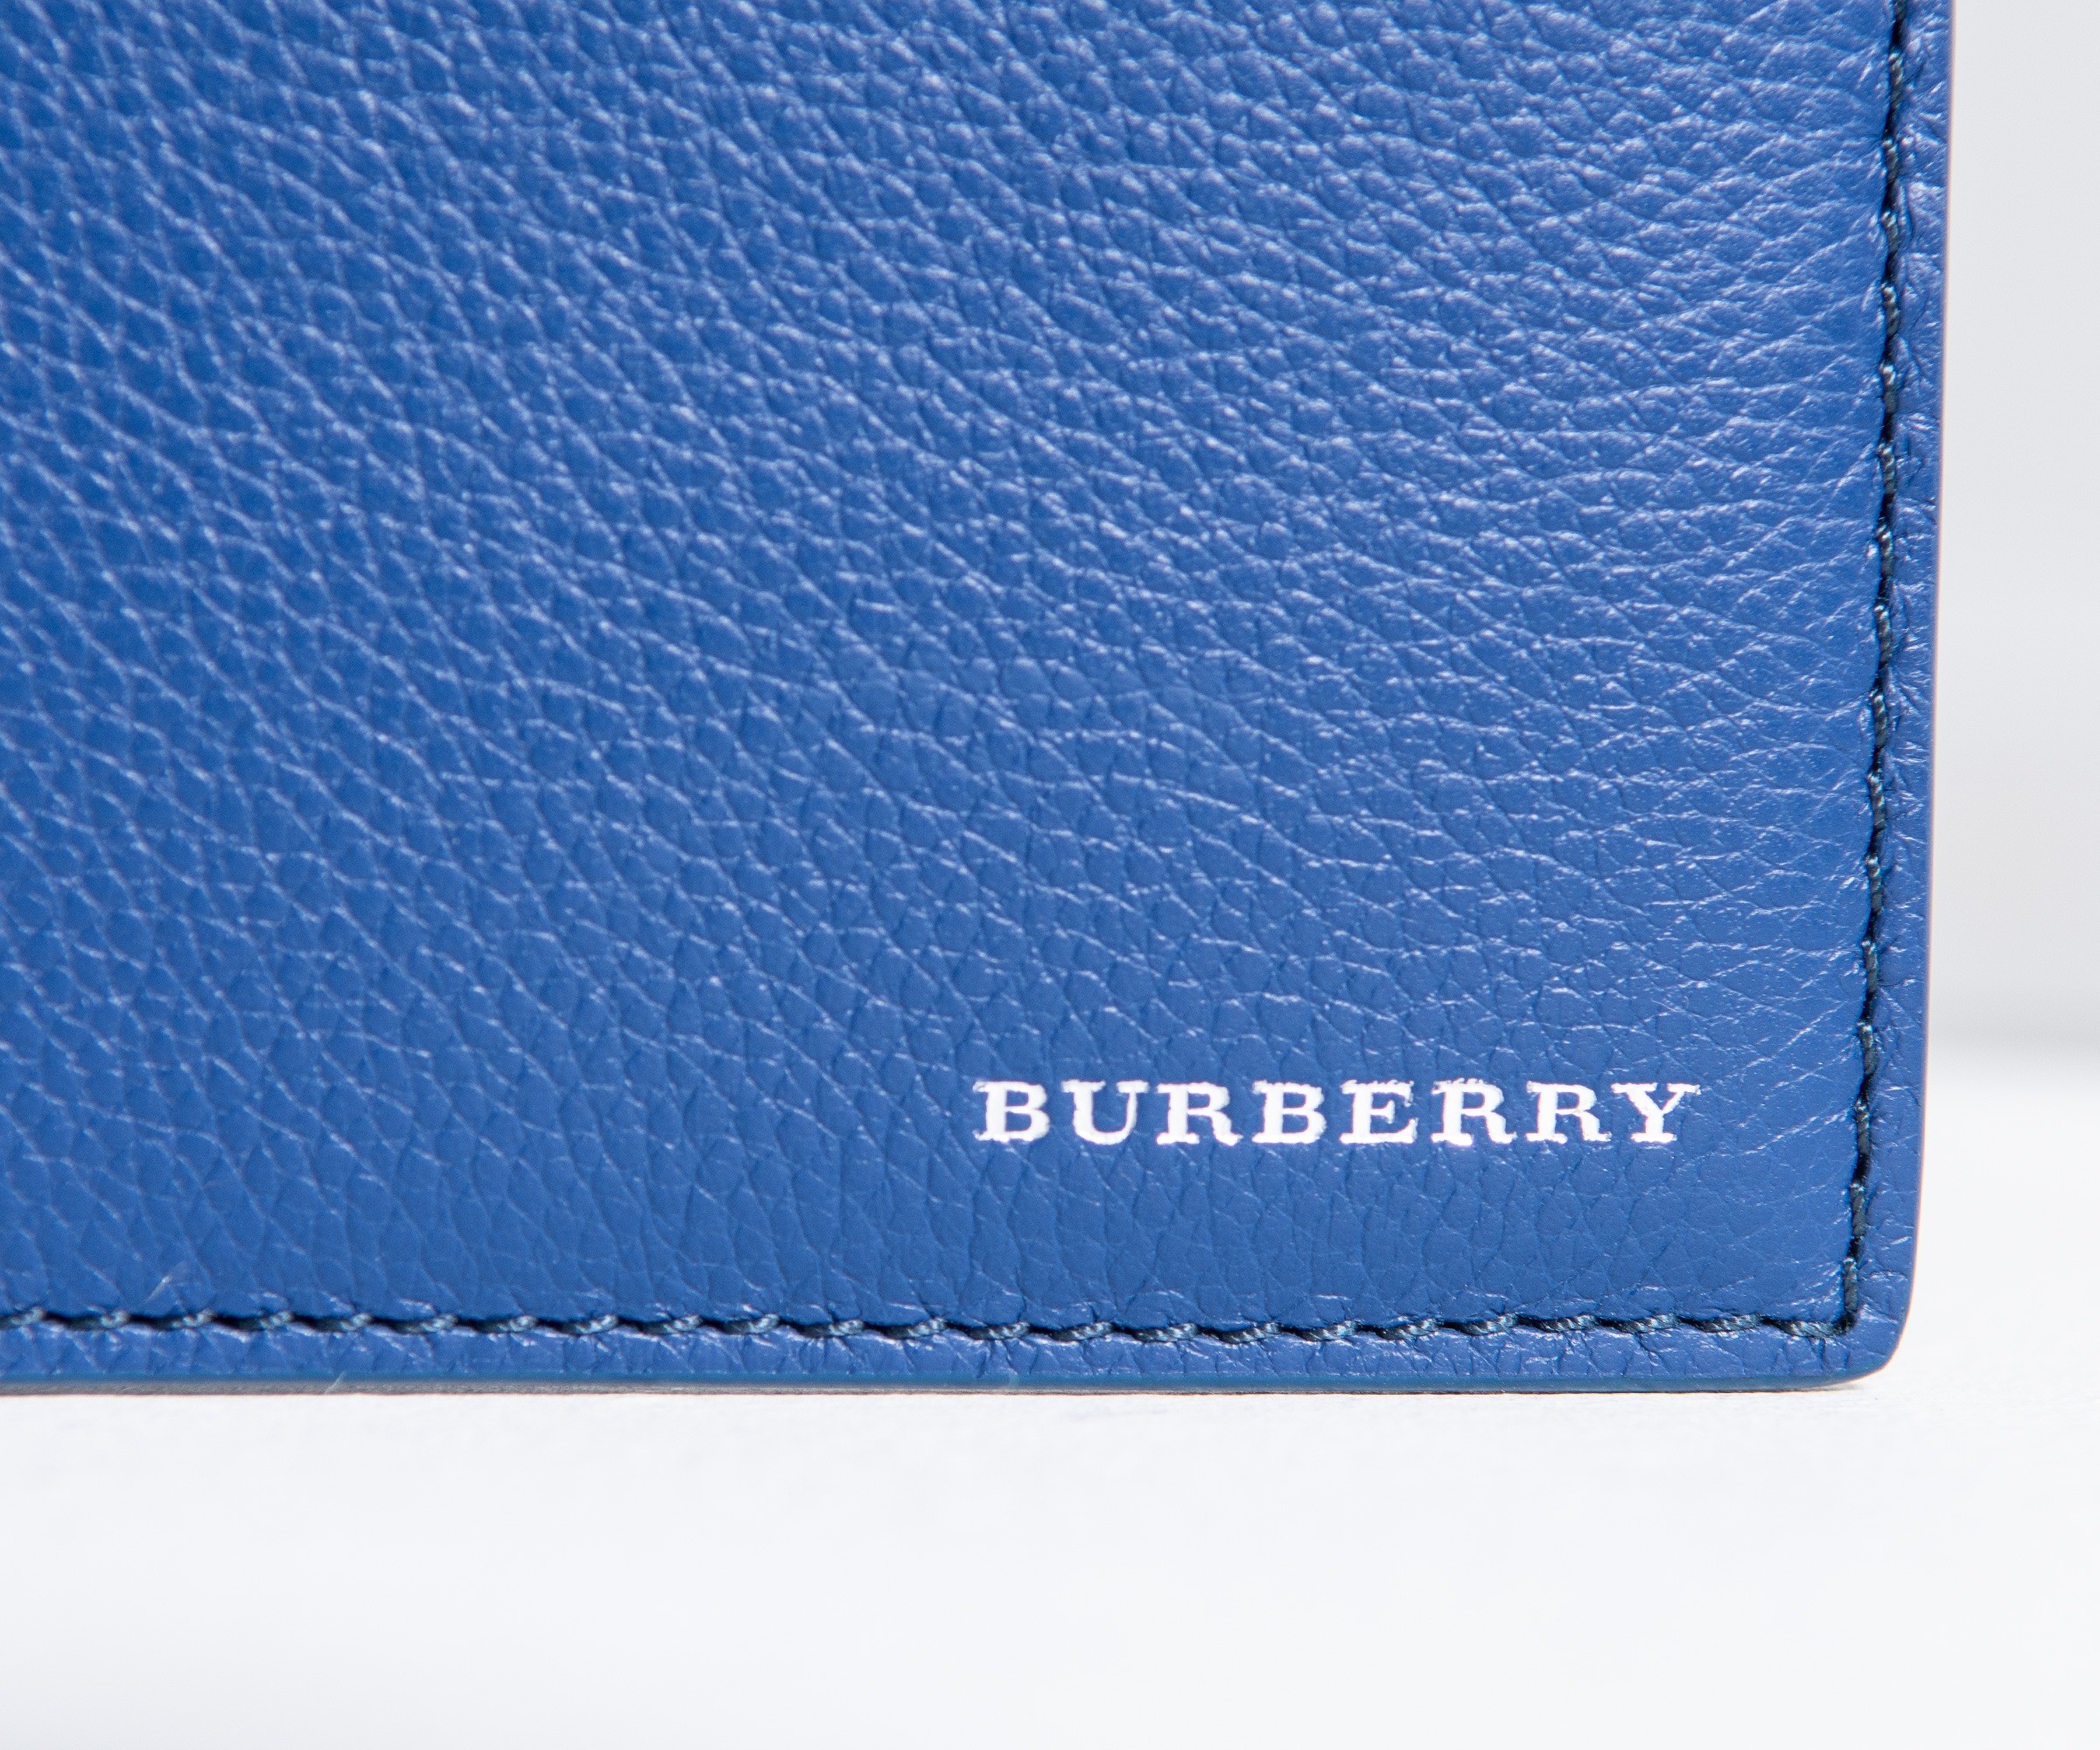 Is this wallet original? : r/Burberry